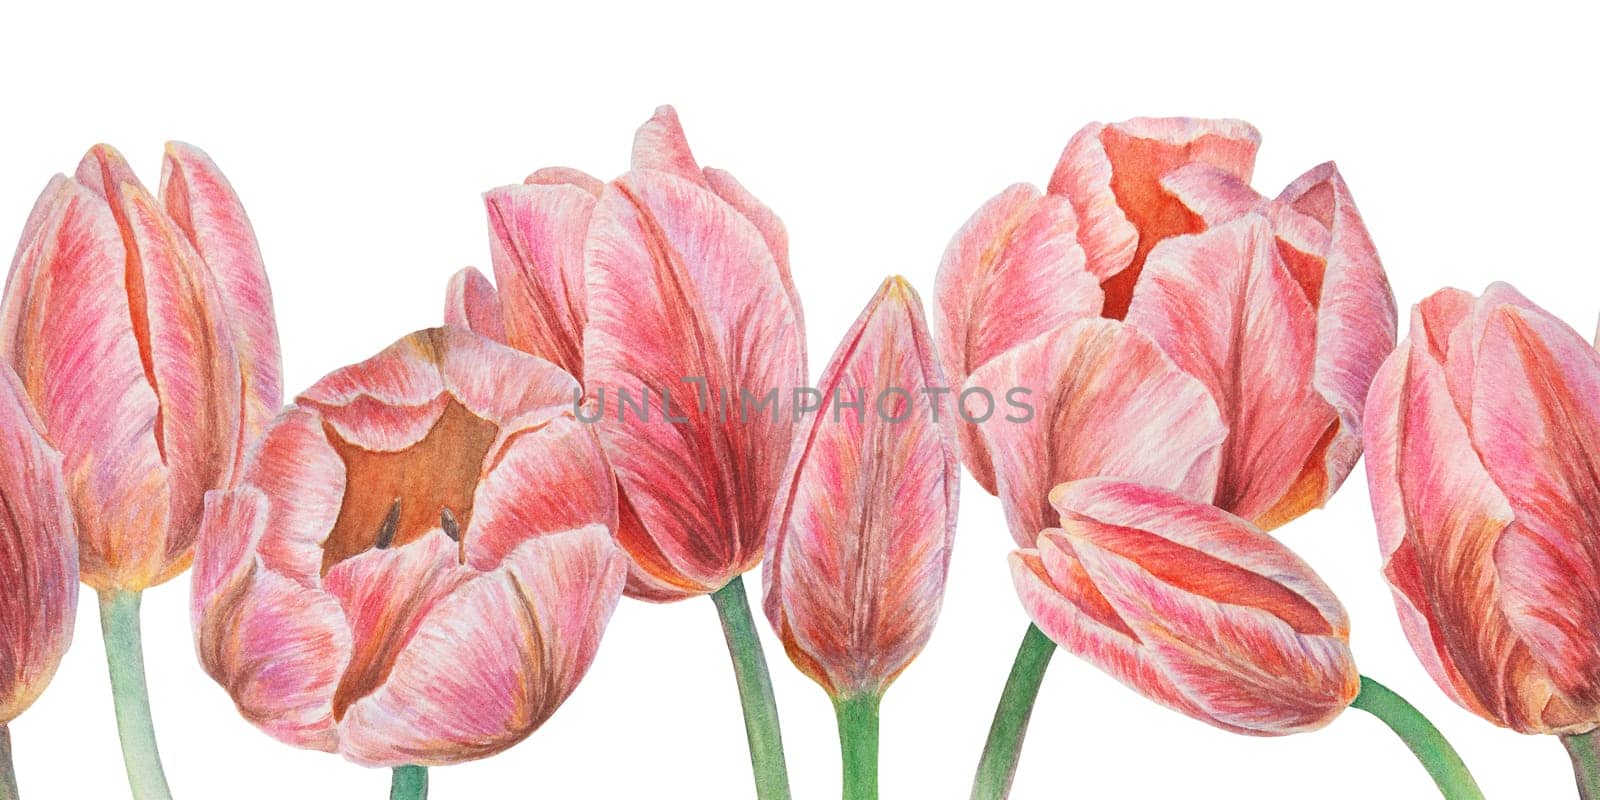 Pink tulips seamless border painted in watercolor, realistic botanical hand drawn illustration isolated on white background for design, wedding print products, paper, invitations, cards, fabric, posters, card for Mother's day, March 8, Easter, festivals